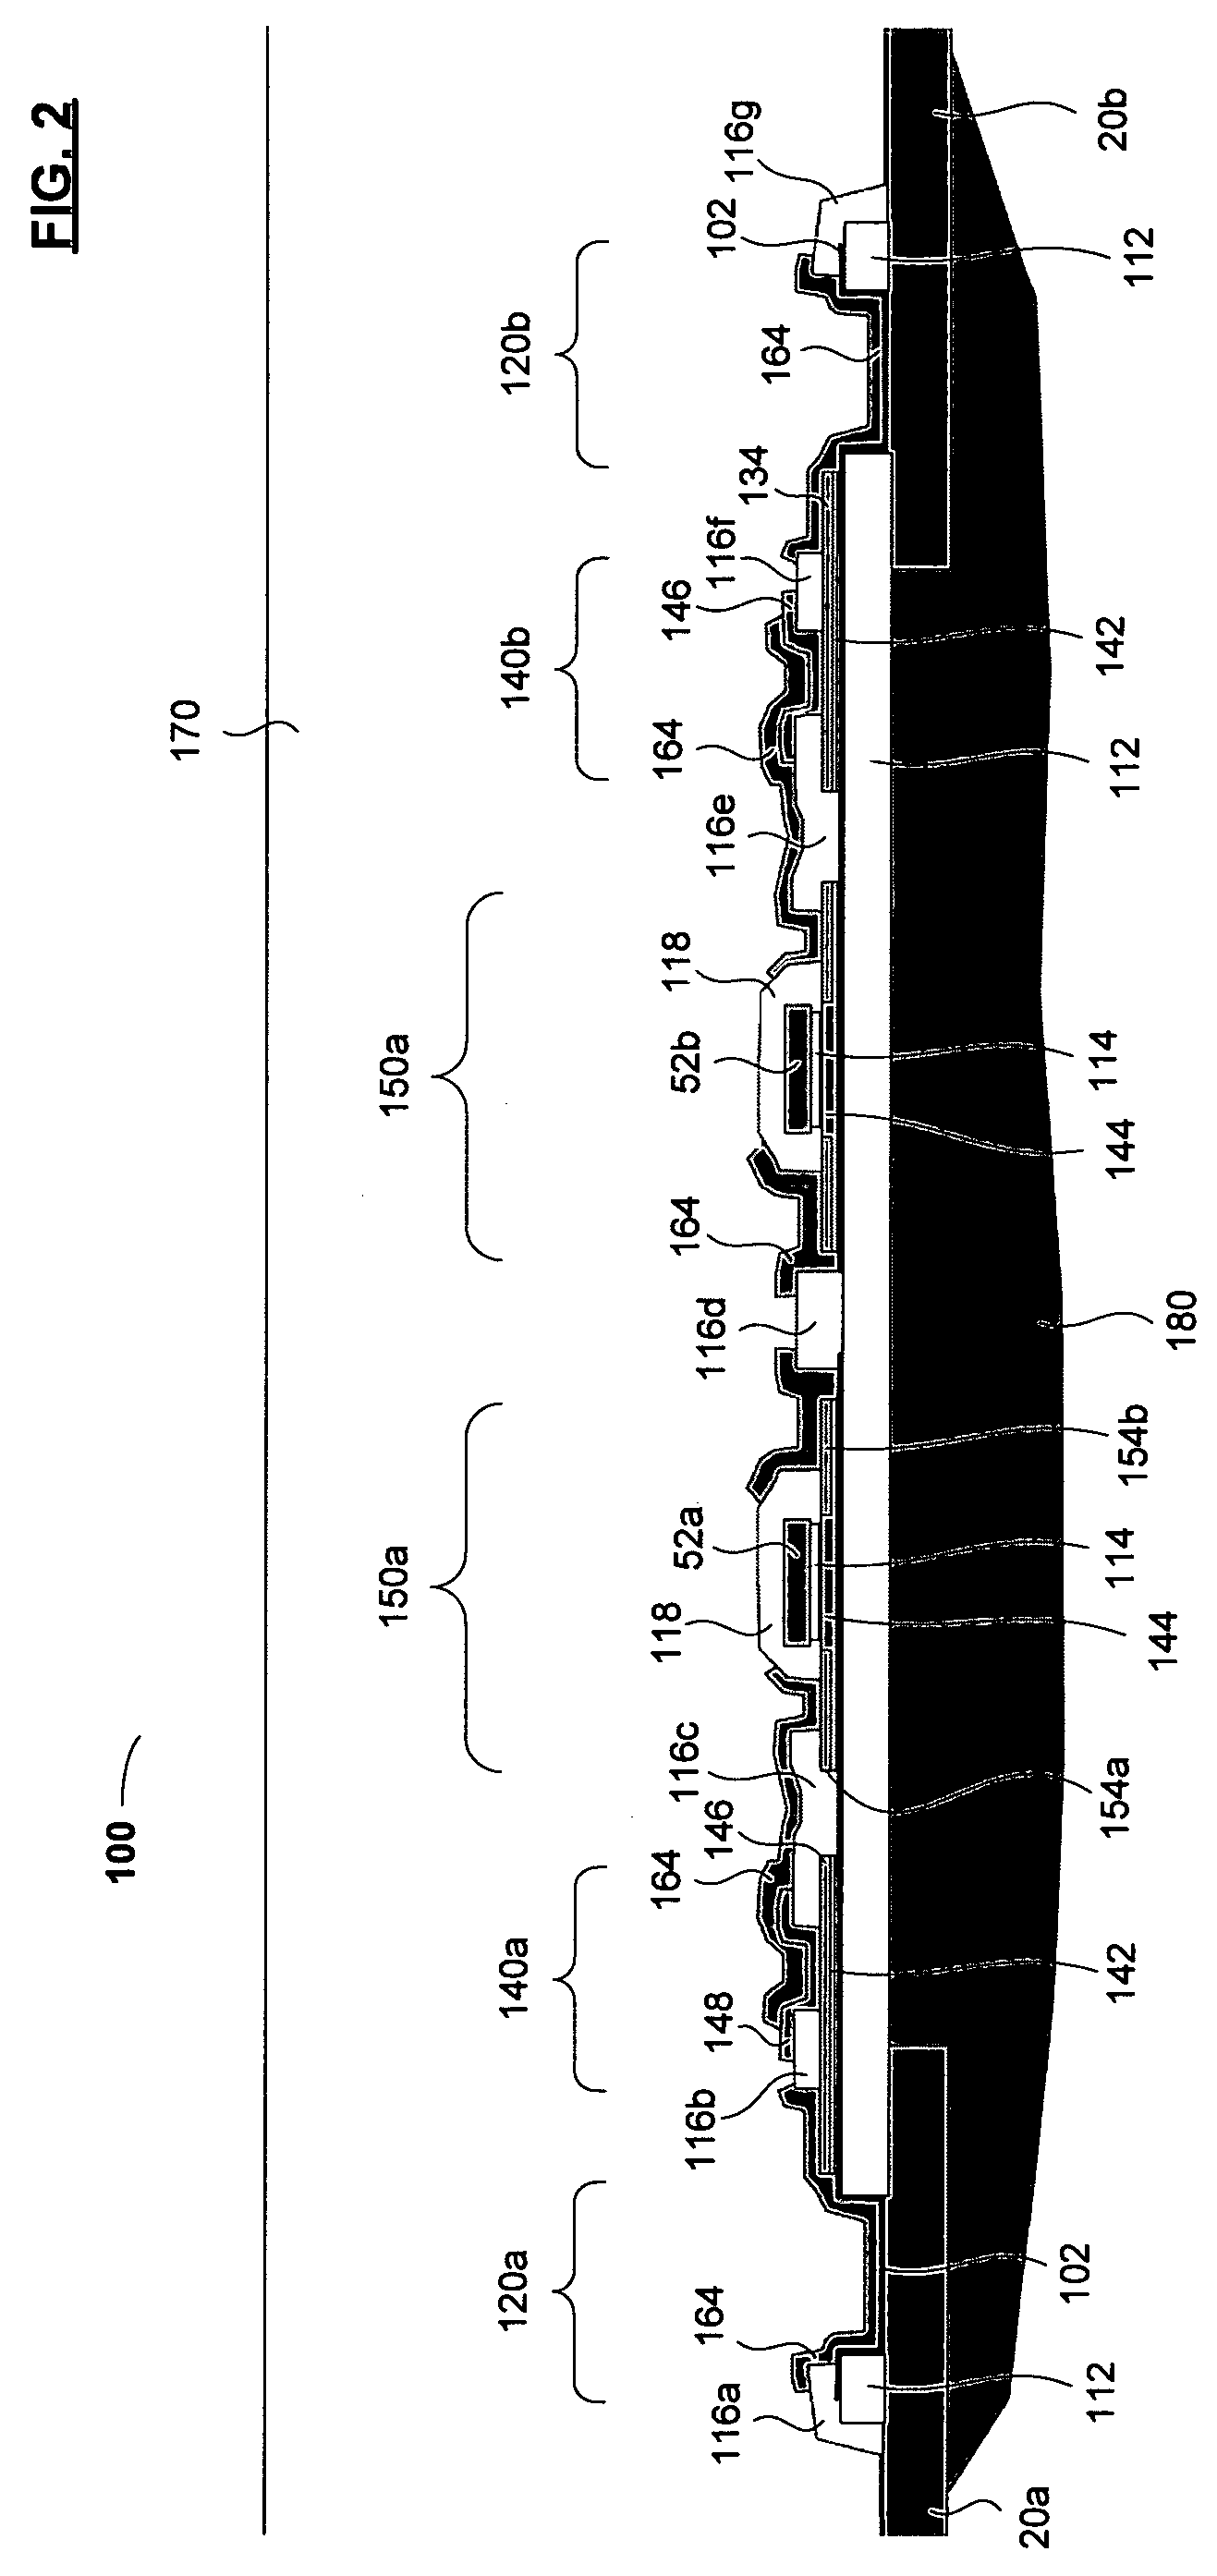 Methods for manufacturing RFID tags and structures formed therefrom